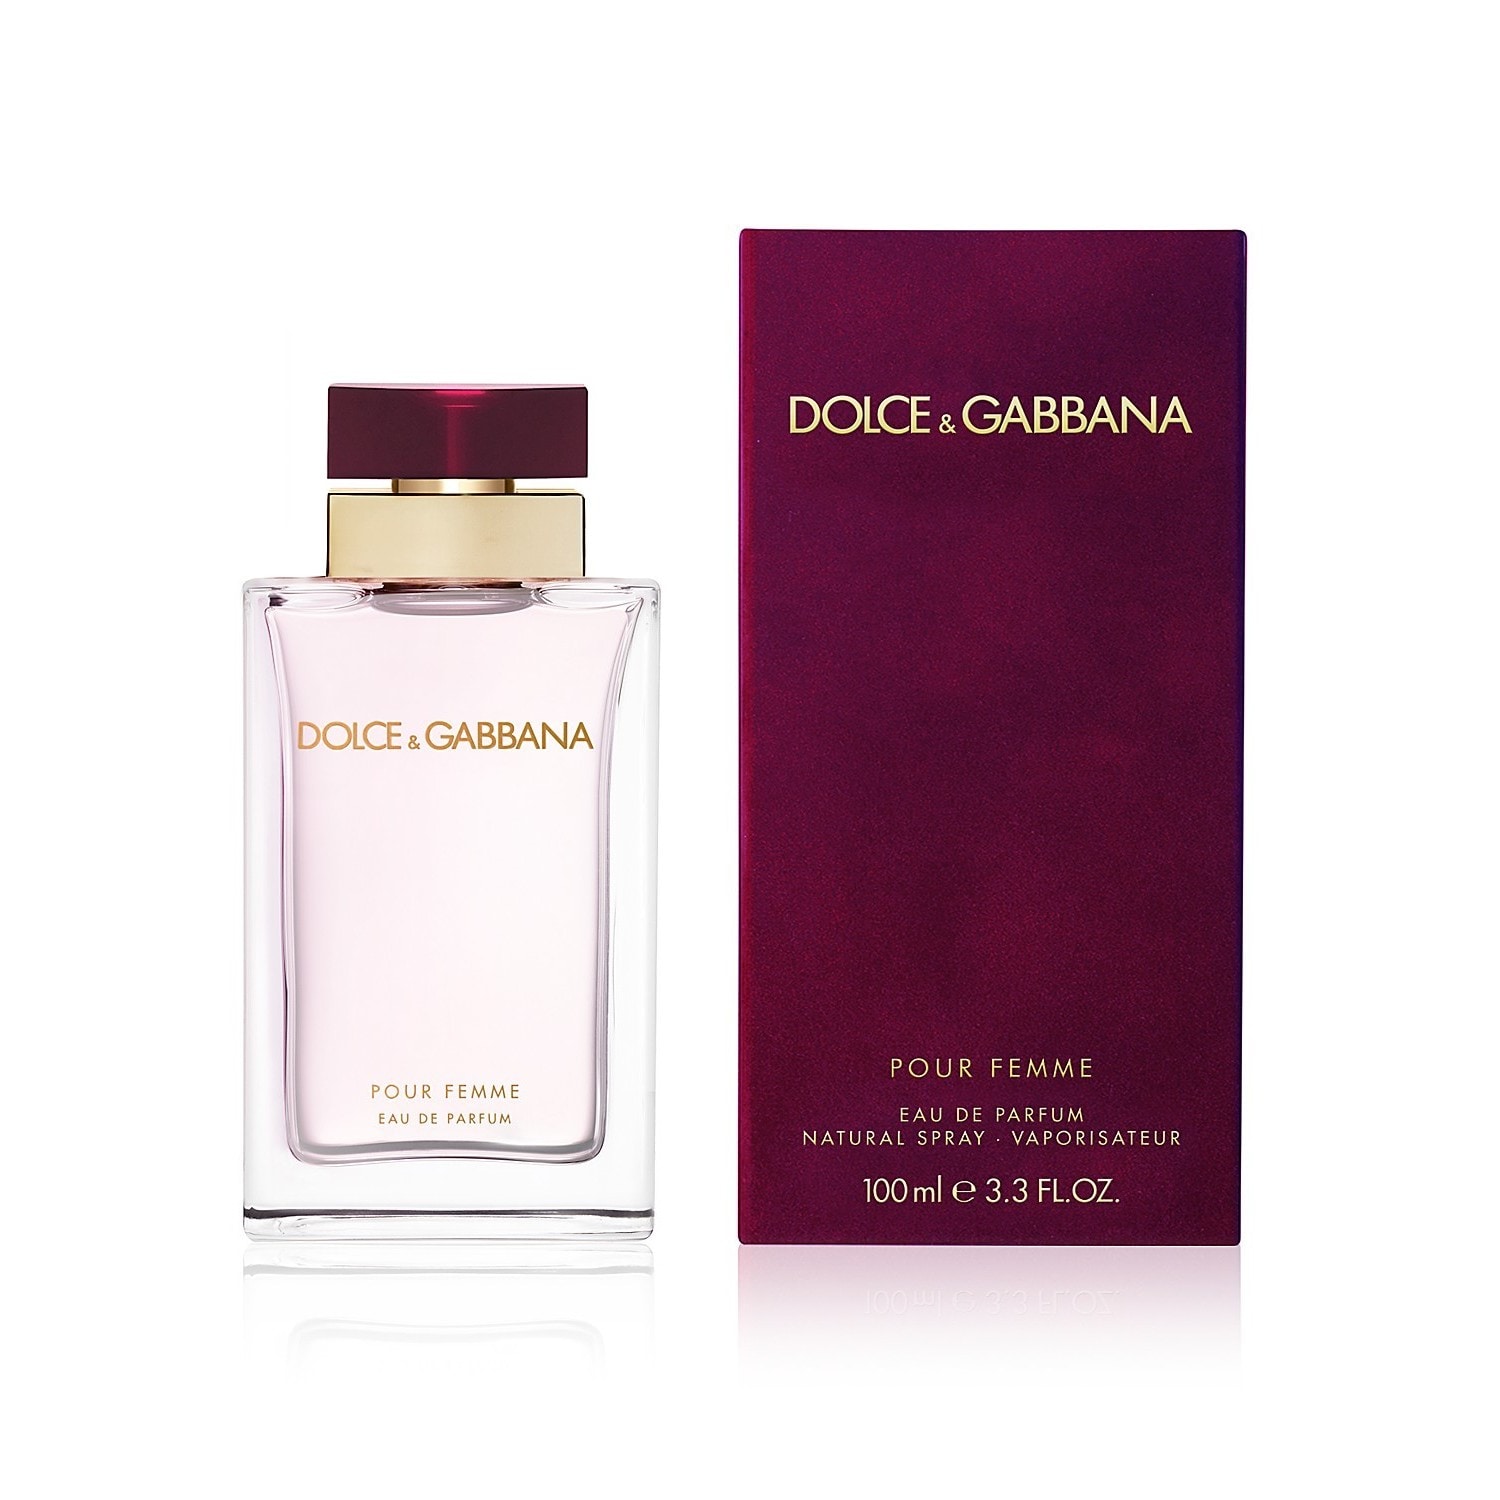 dolce and gabbana for women